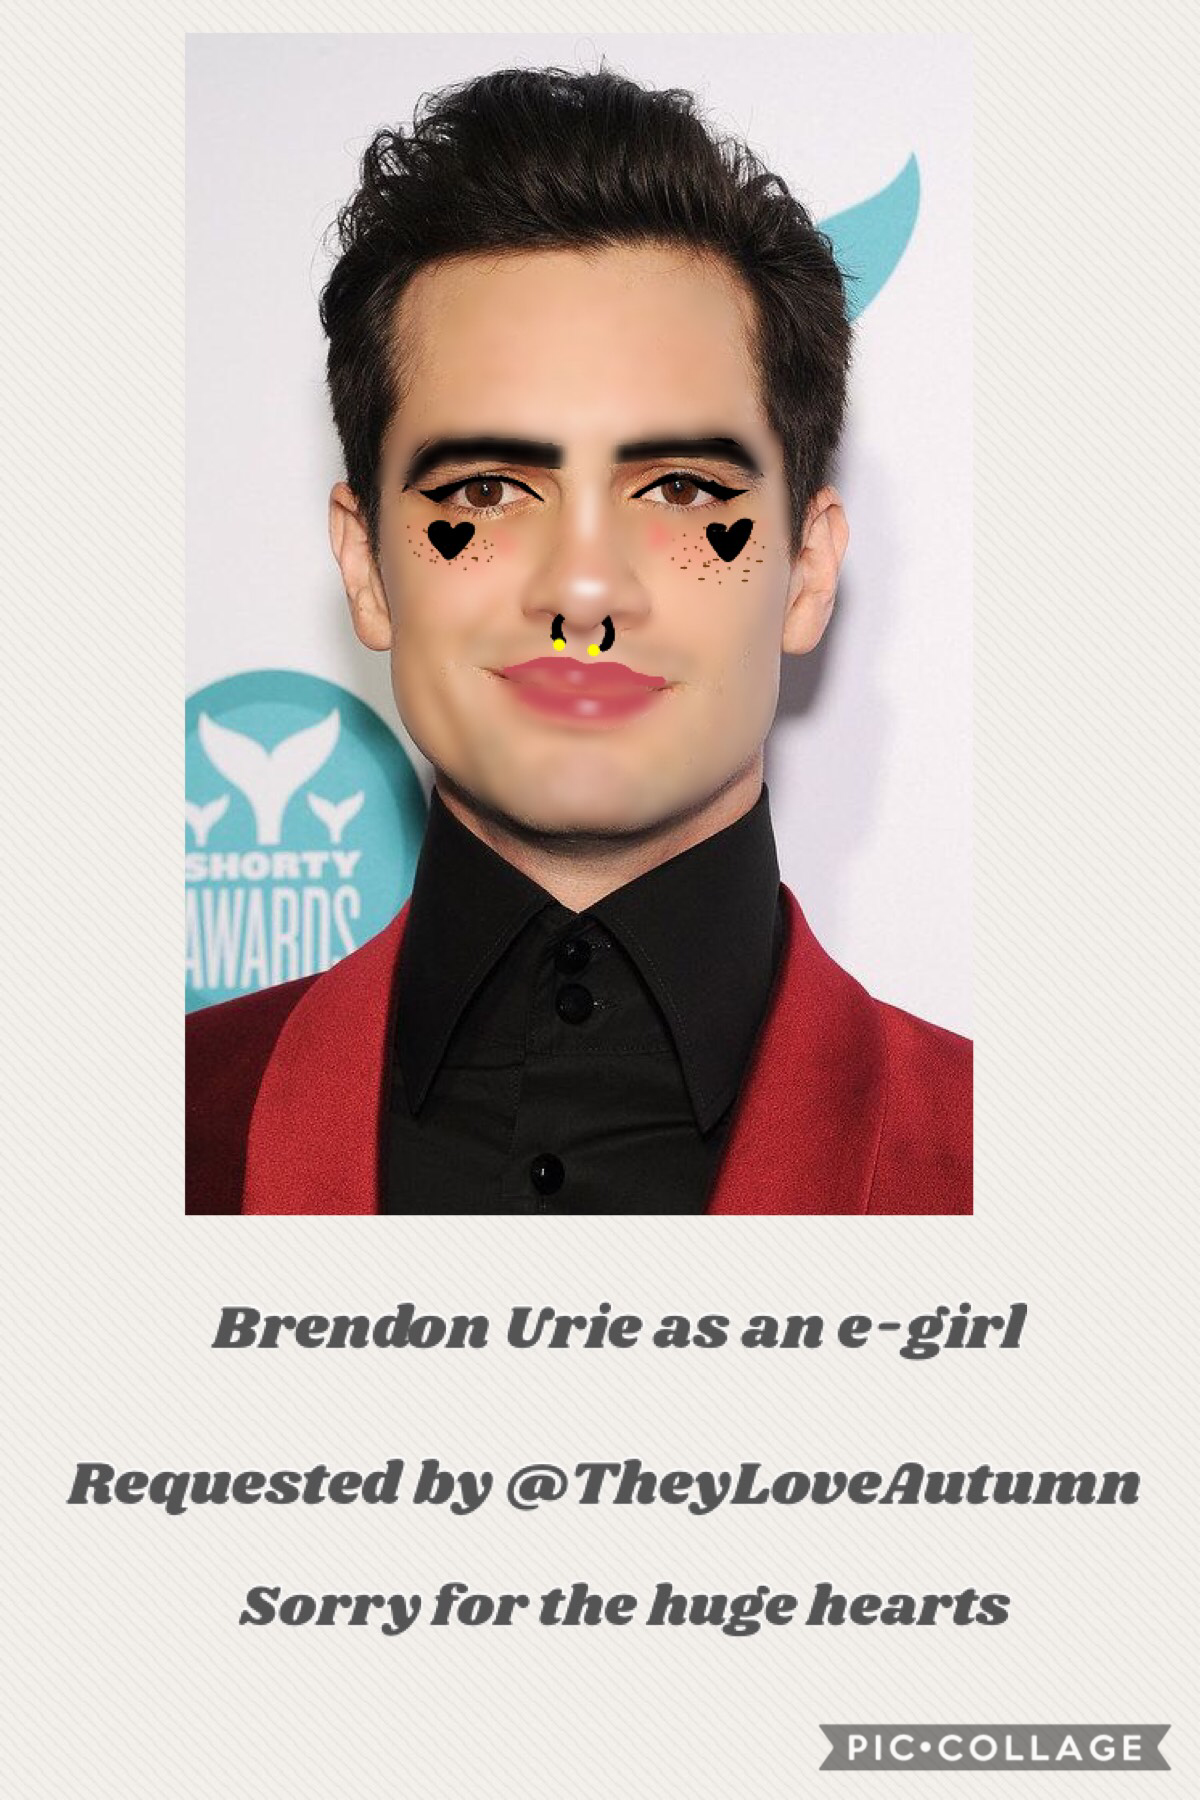 this one's not even that bad
But still, Brendon with a septum ring terrifies me for some reason
19-2-19